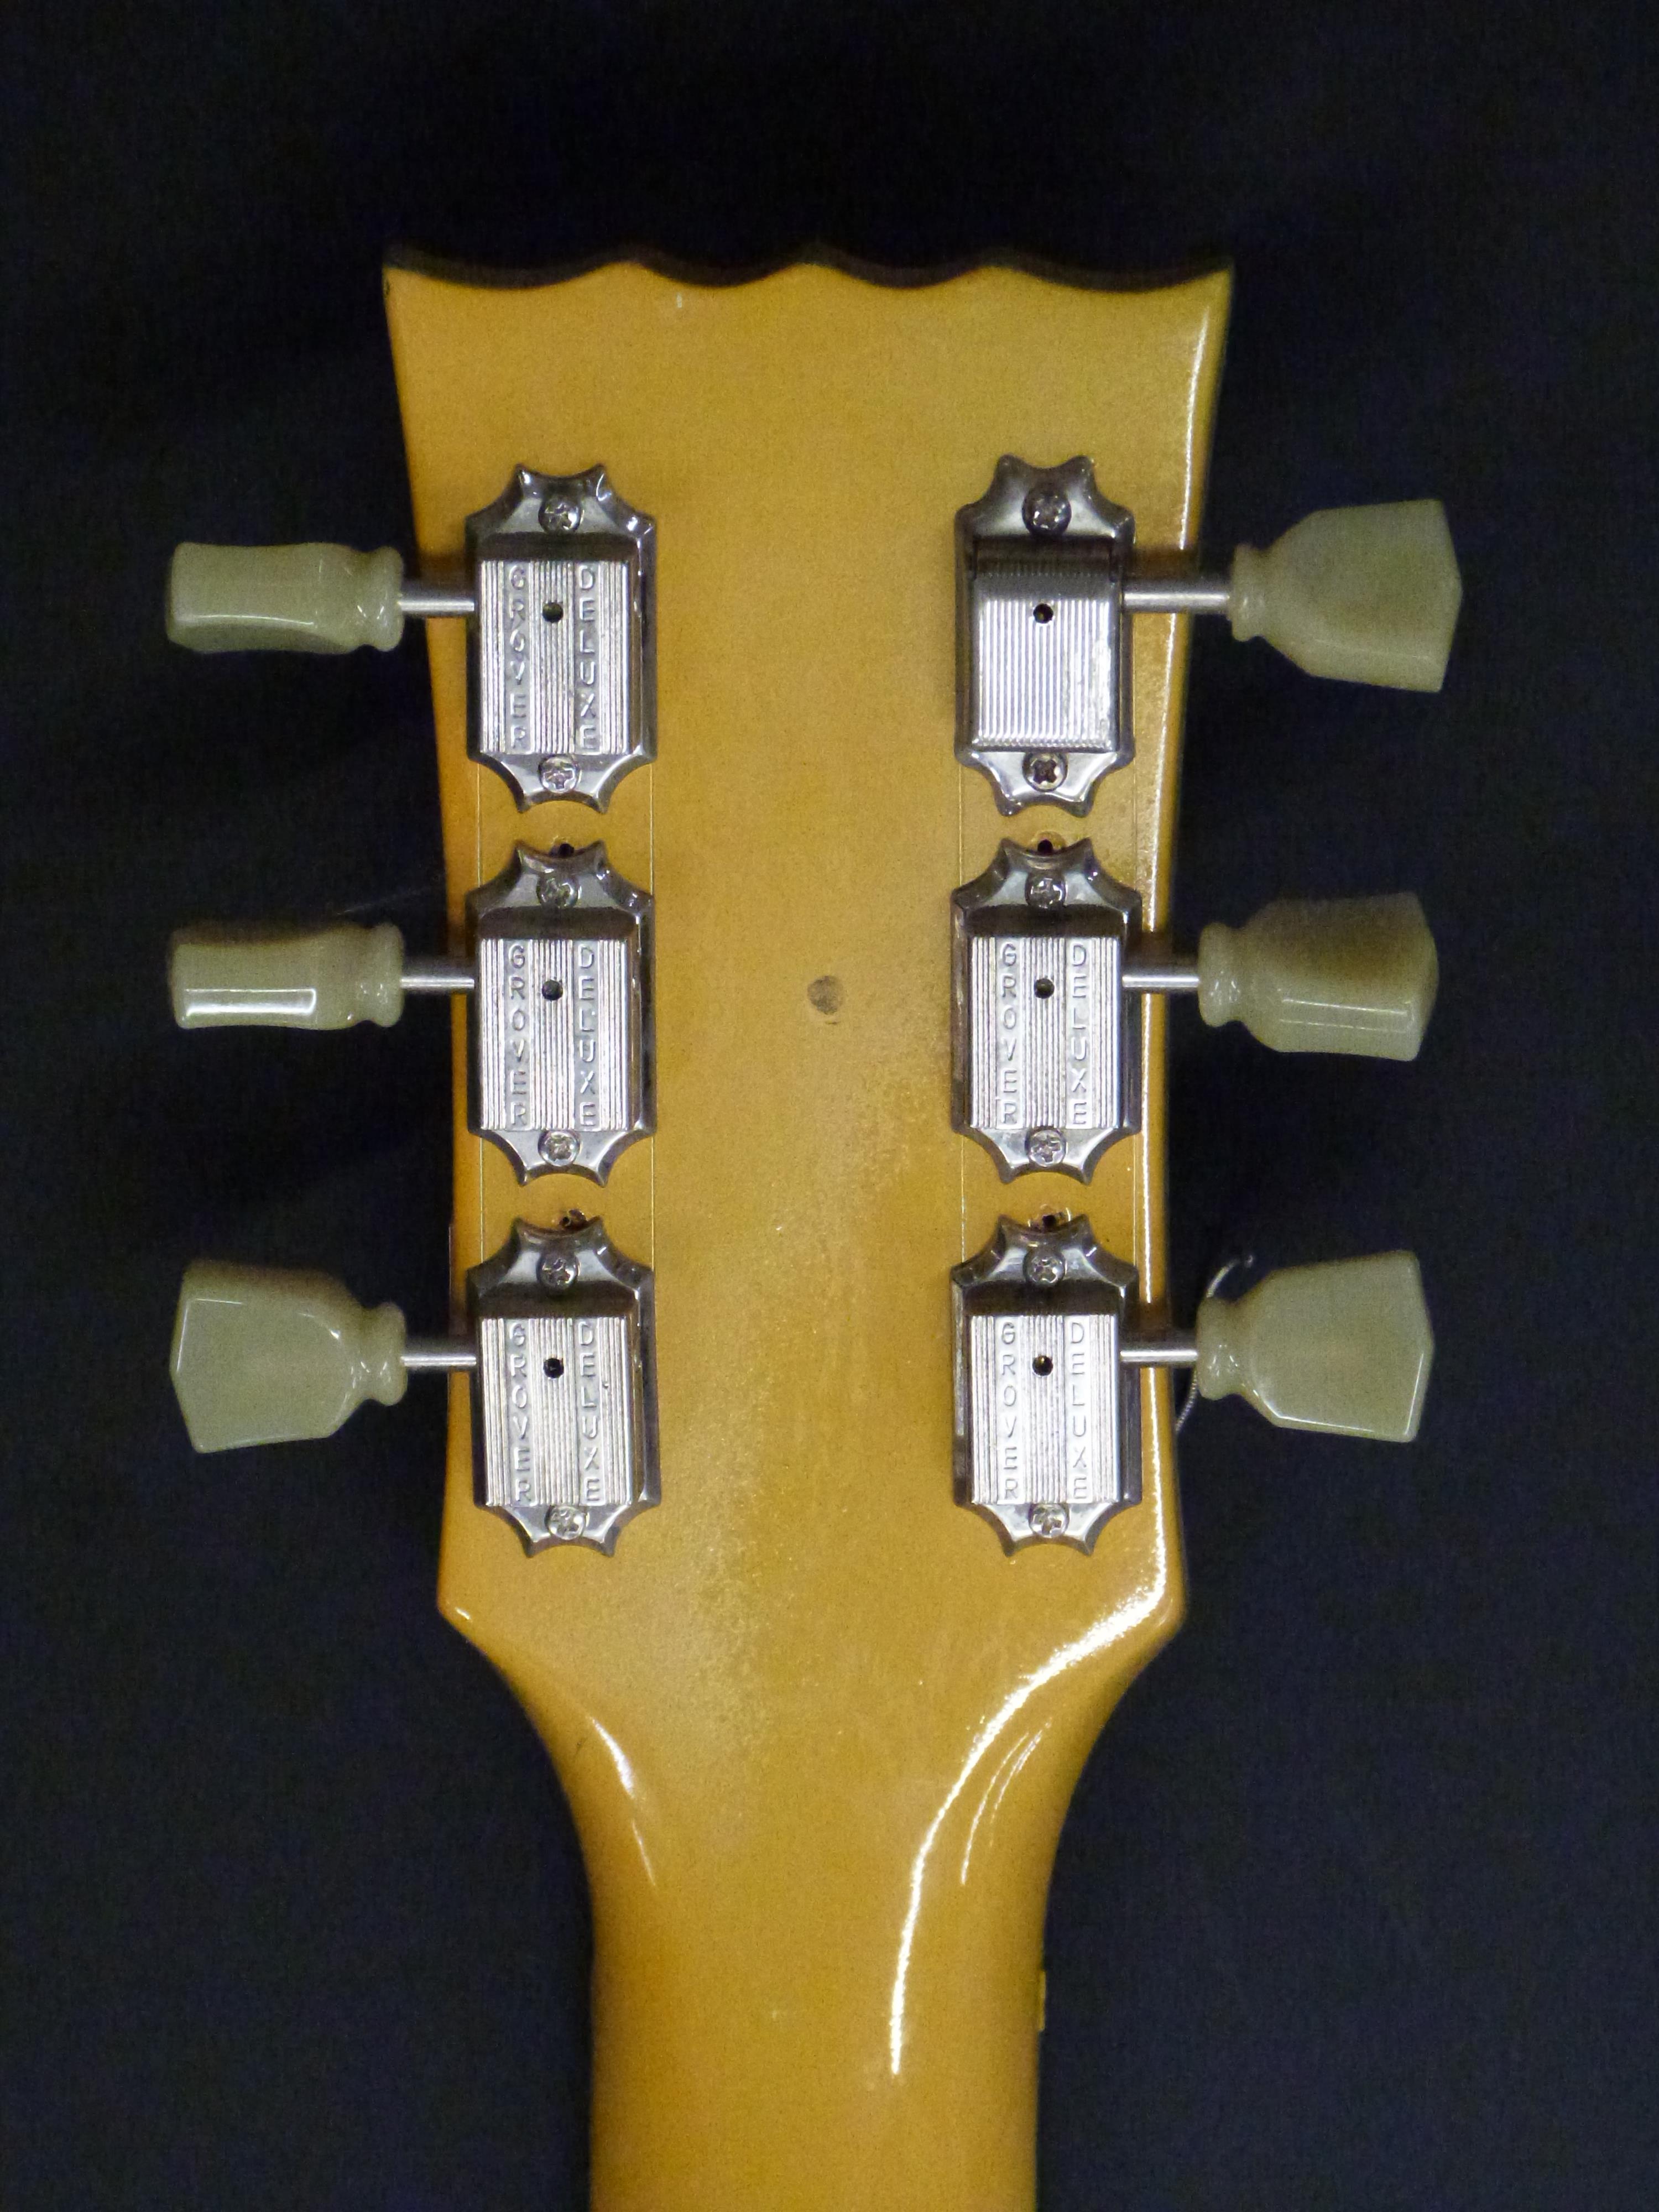 Electric guitar in yellow lacquered finish by Vintage, Wilkinson pick-up - Image 6 of 6